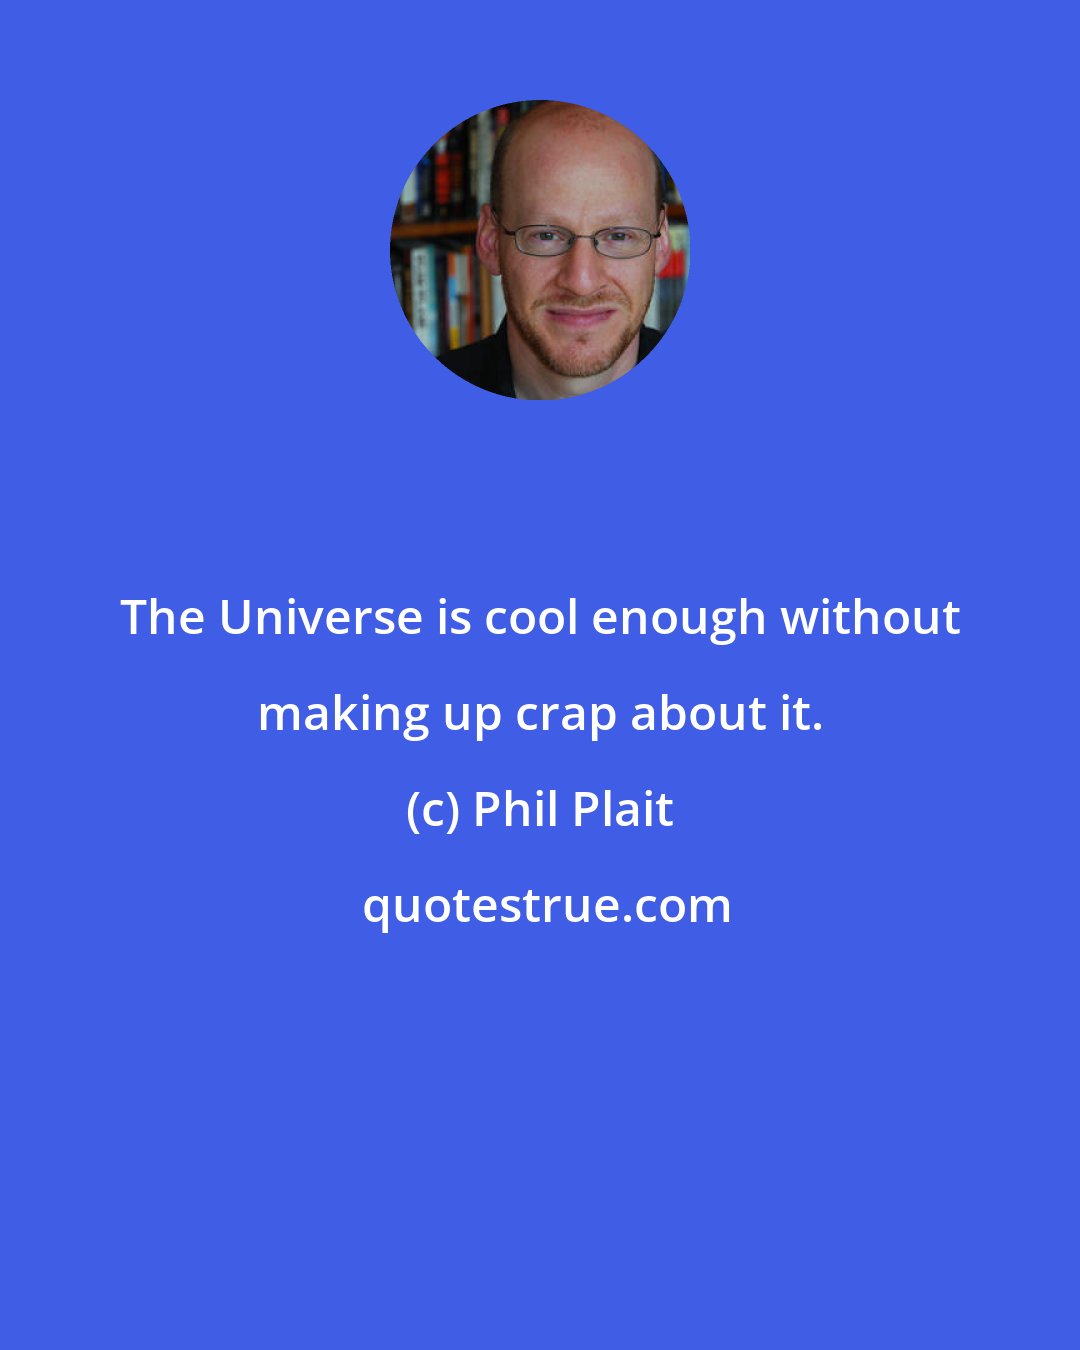 Phil Plait: The Universe is cool enough without making up crap about it.